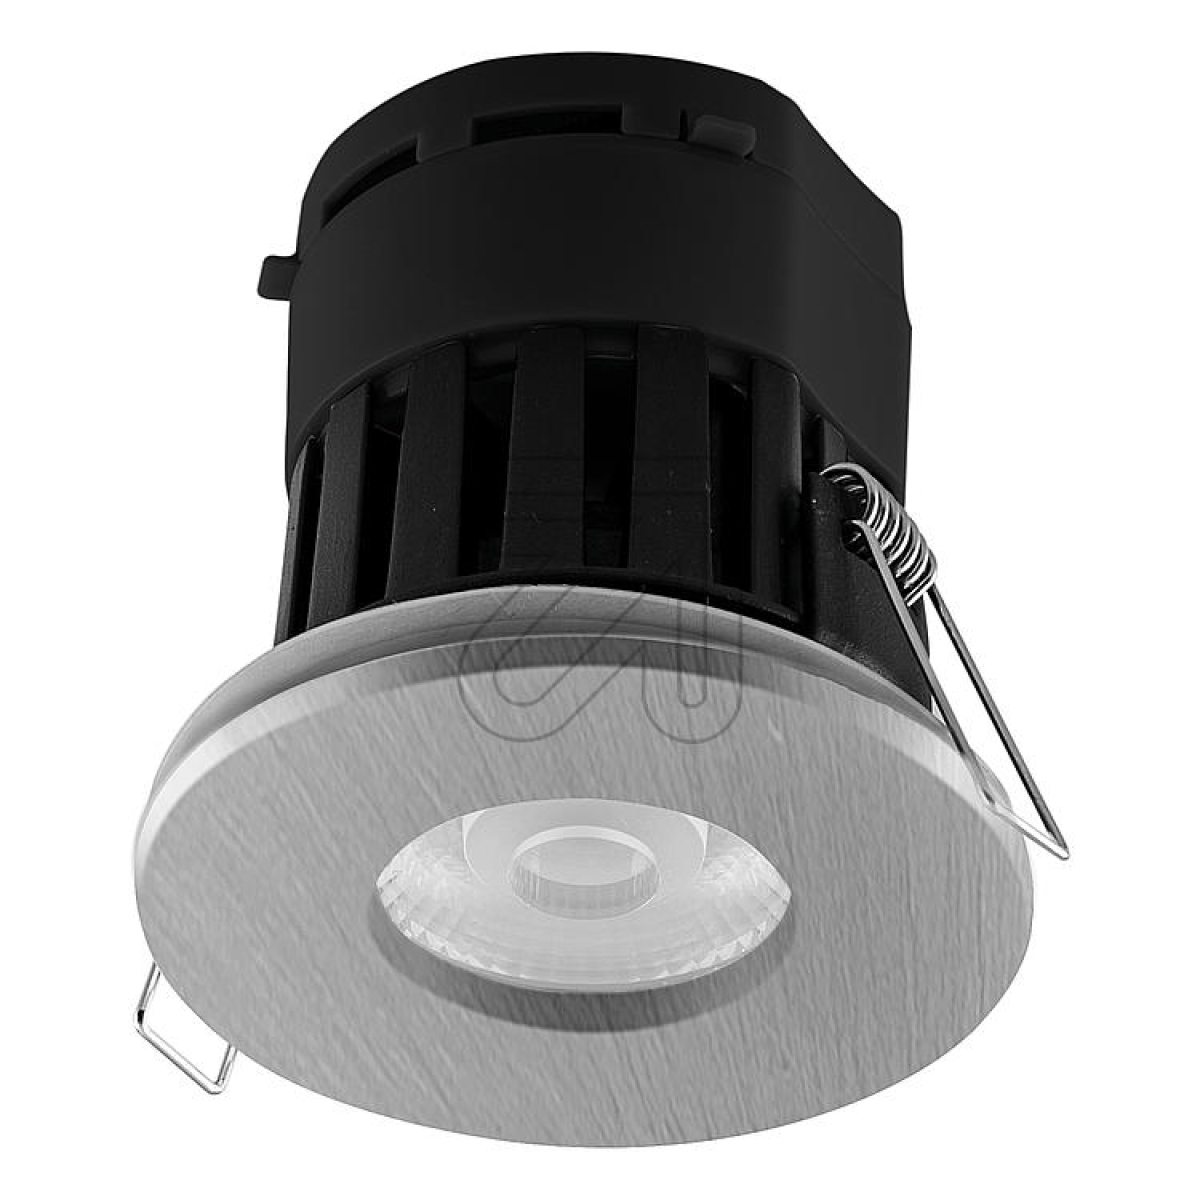 EVNLED recessed spotlight round stainless steel 3000/4000K 7W IP65 P65071325Article-No: 670530